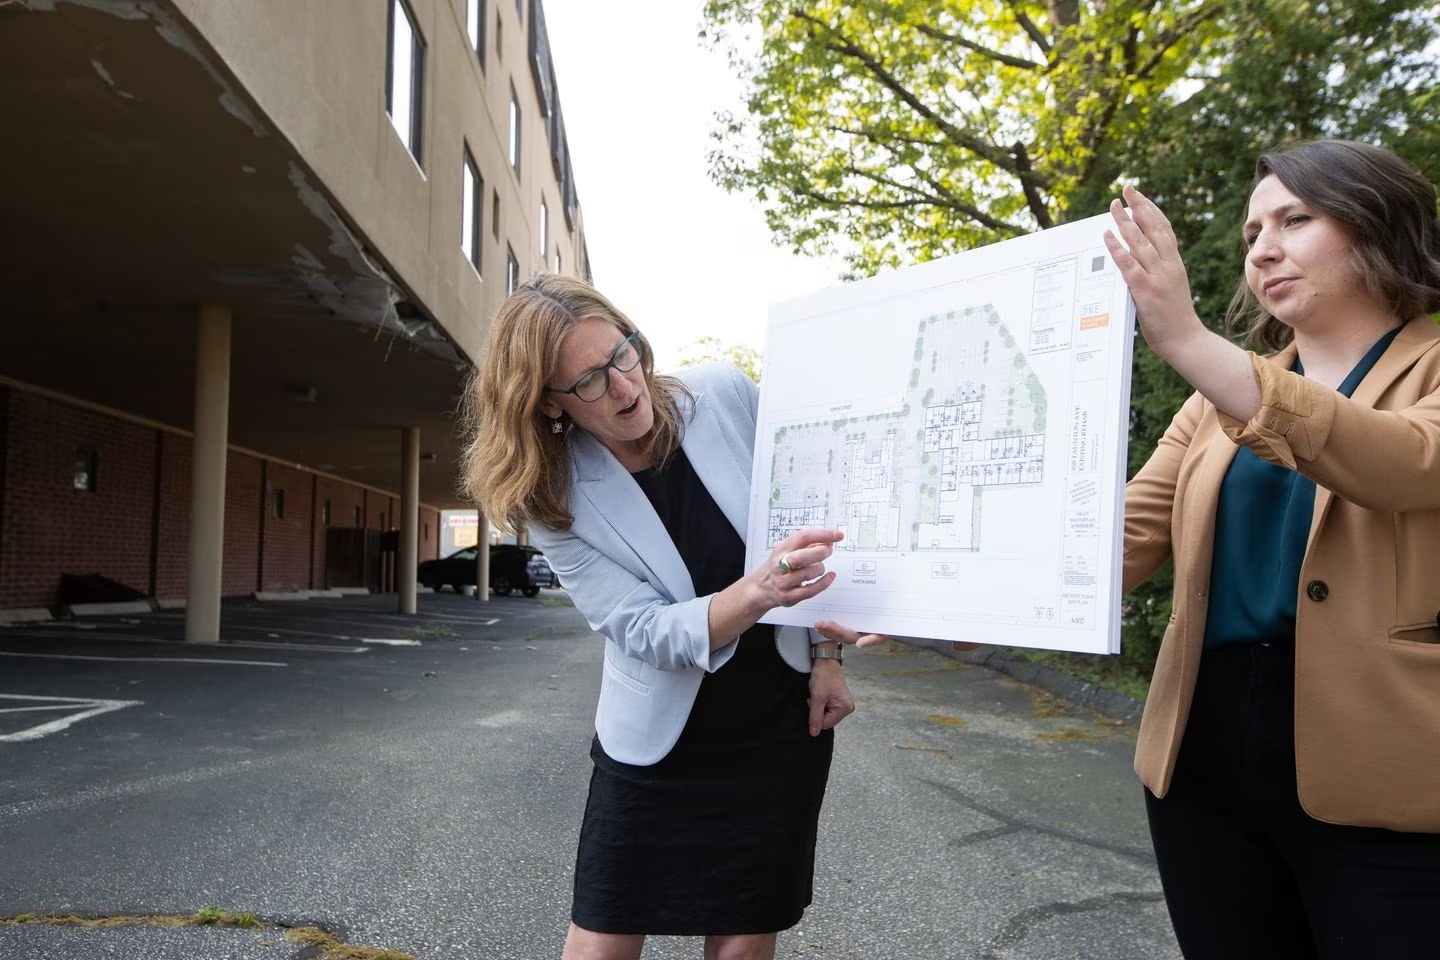 Jennifer Hawkins, president and executive director of One Neighborhood Builders (left) points to a mock up held by Grace Evans of One Neighborhood that features their project at 350 Taunton Avenue in East Providence. MATTHEW HEALEY FOR THE BOSTON GLOBE